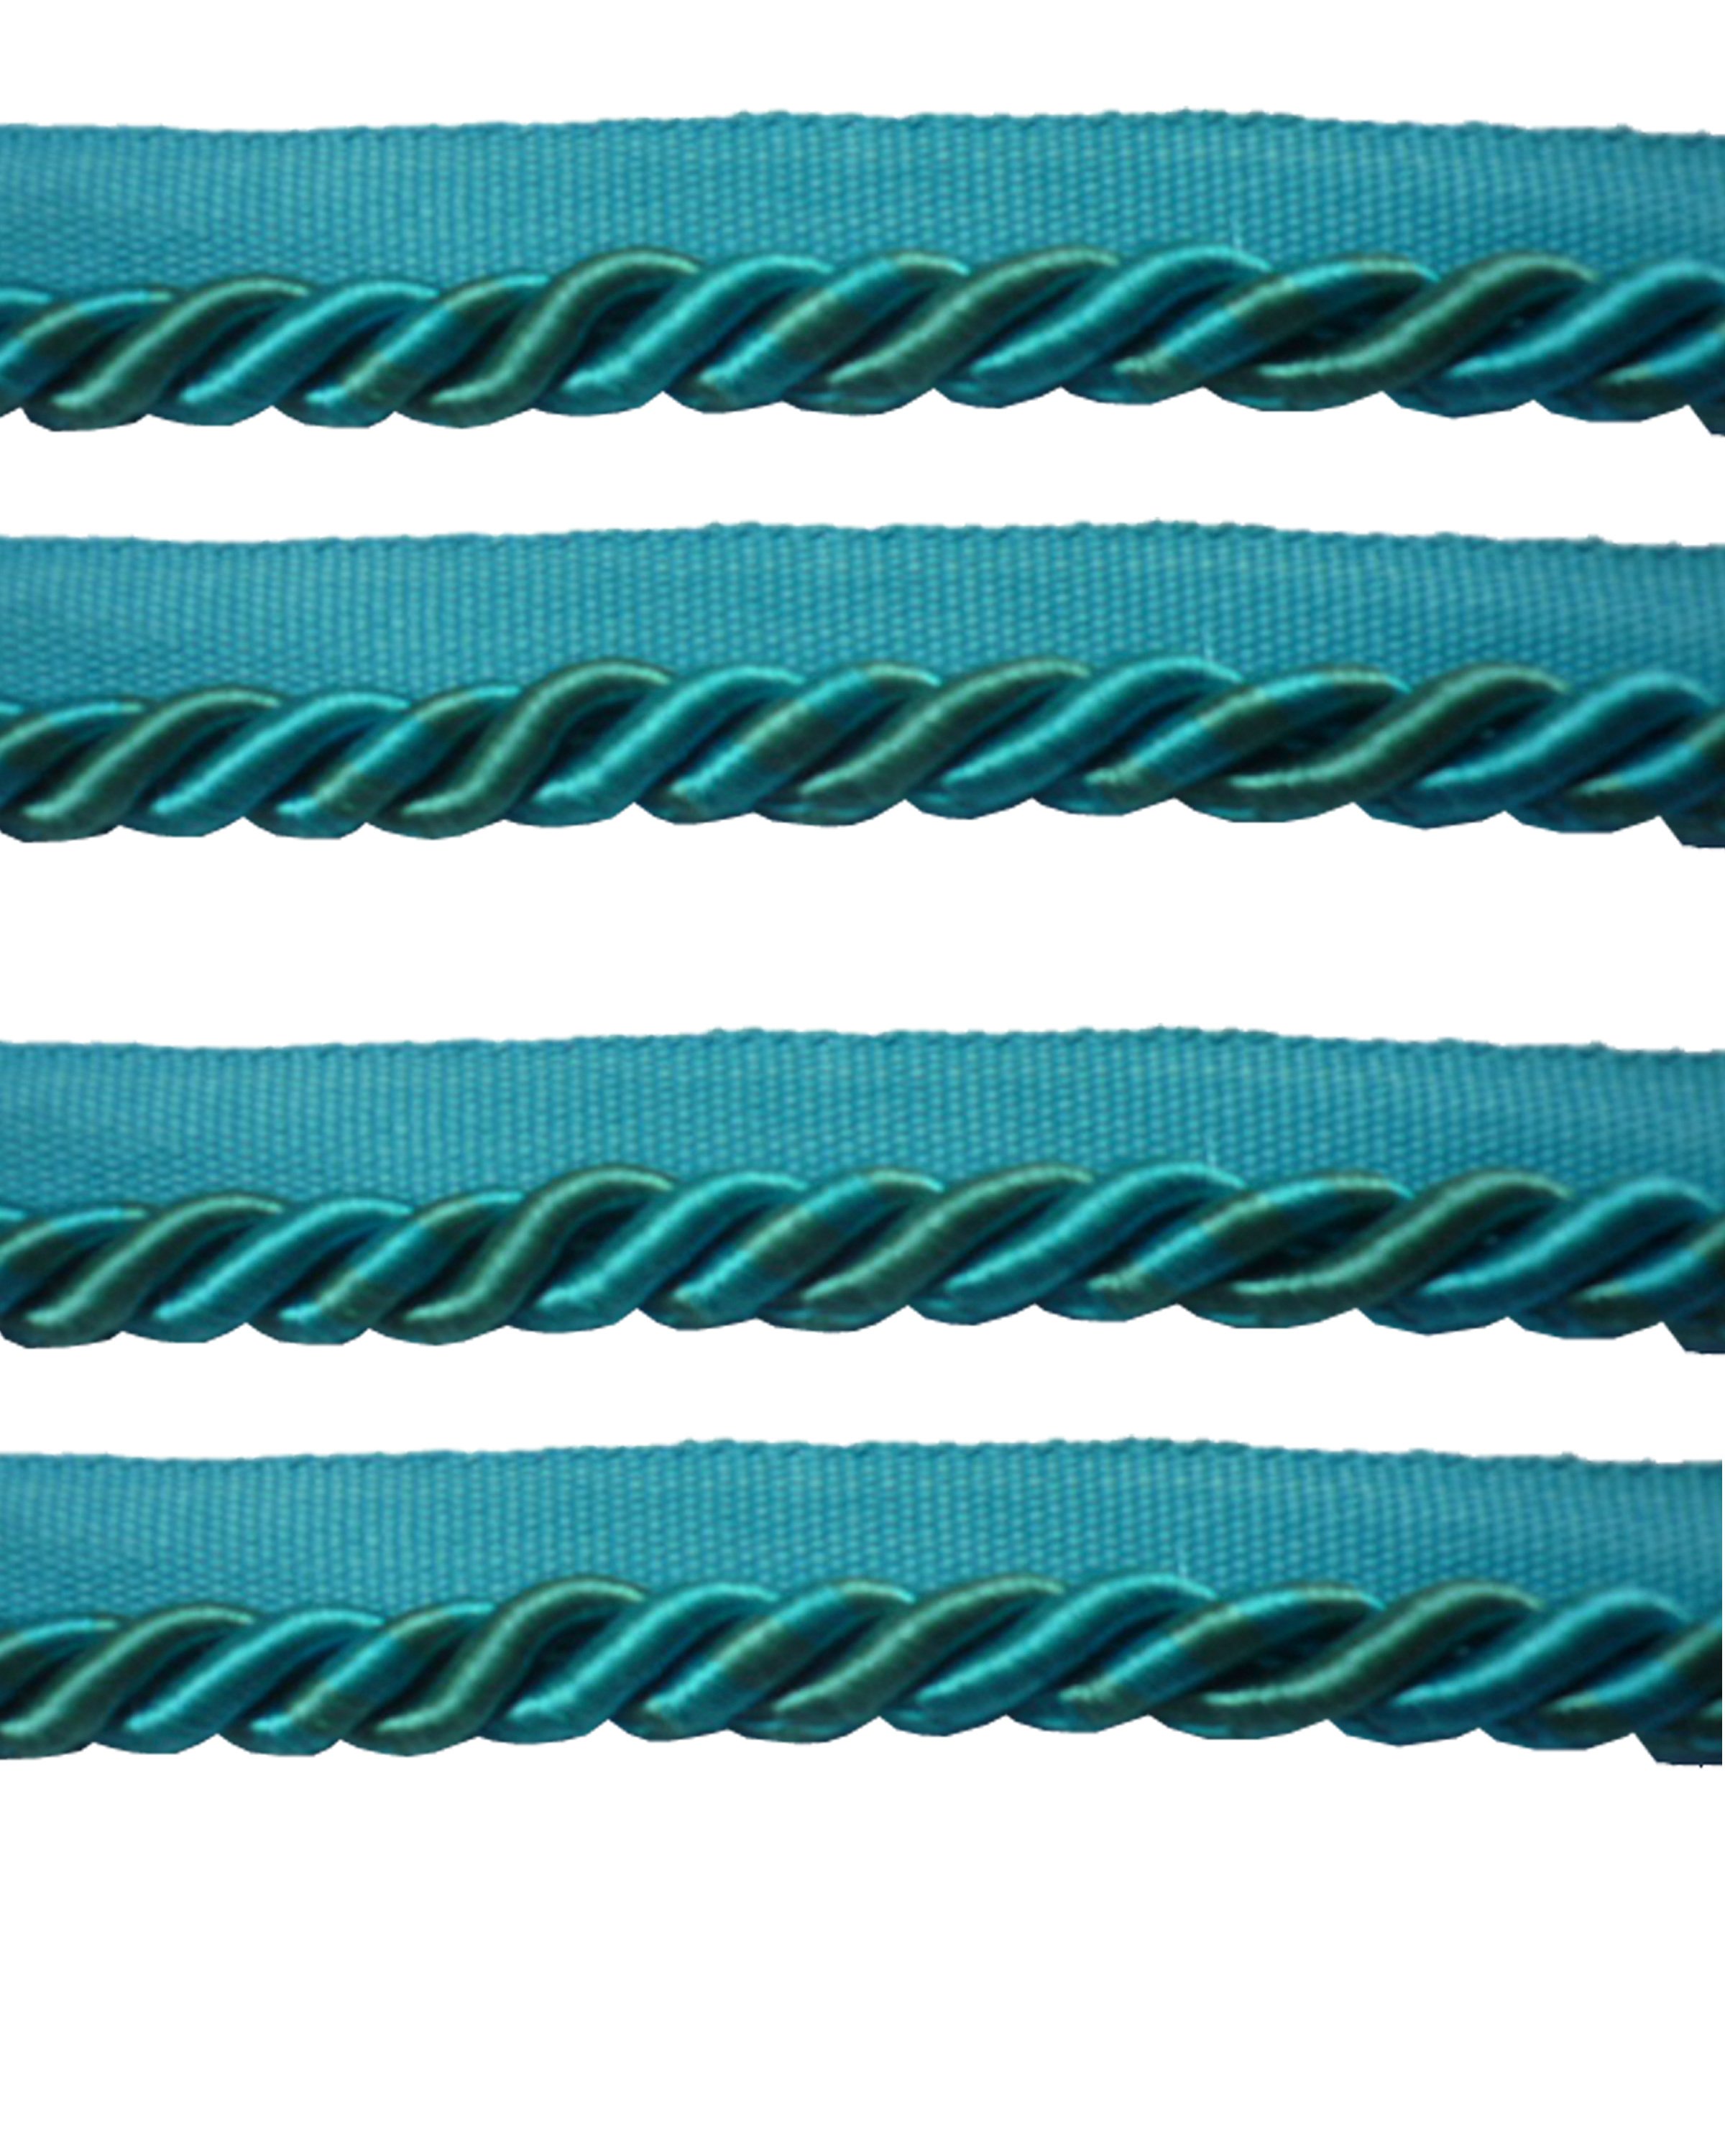 Piping Cord 8mm on Tape - Aqua Blue Price is for 5 metres